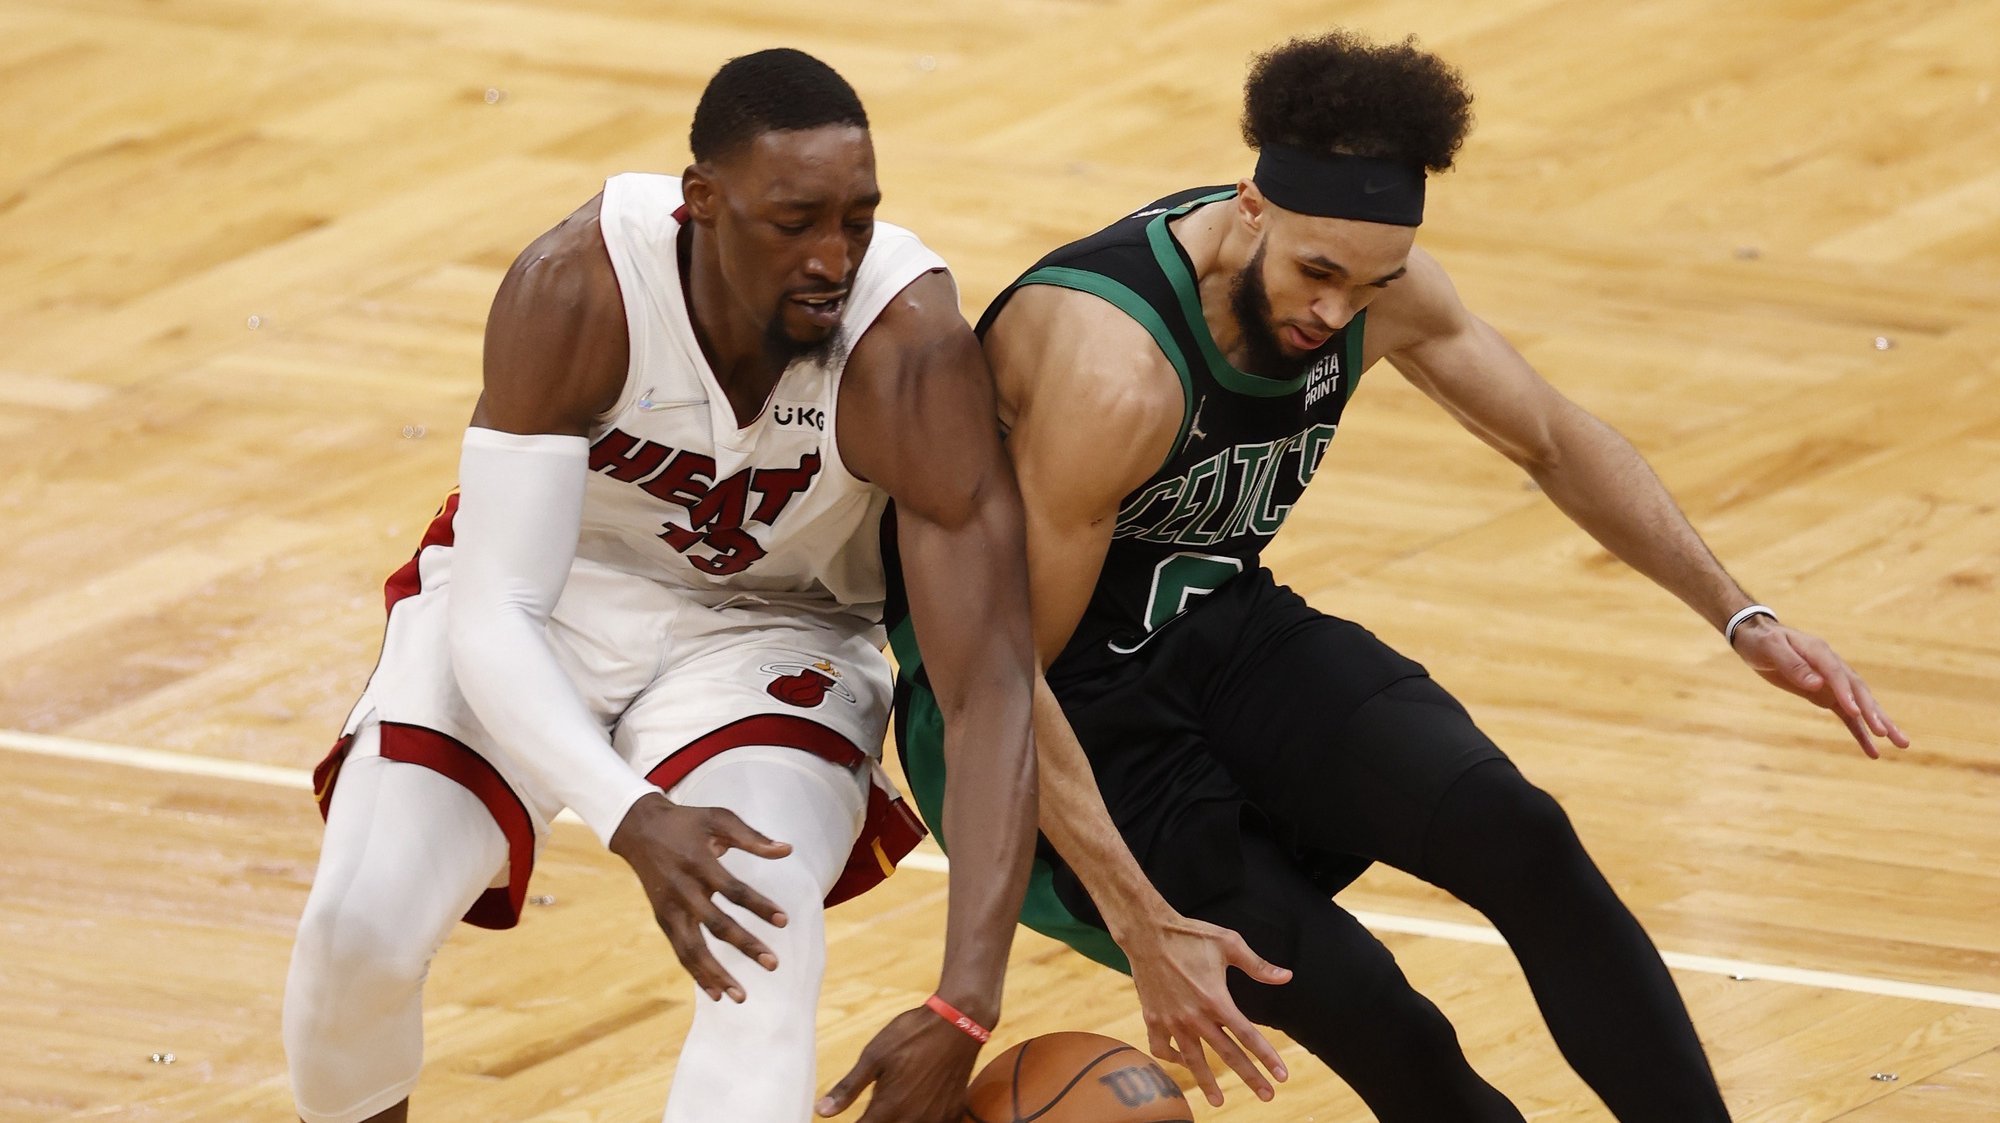 epa09981322 Miami Heat center Bam Adebayo (L), and Boston Celtics guard Derrick White (R) in action, during the second half of Game 6 of the NBA Eastern Conference Finals between the Boston Celtics and the Miami Heat at TD Garden, in Boston, Massachusetts, USA, 27 May 2022. The Boston Celtics lead the best of seven series 3-2.  EPA/CJ GUNTHER  SHUTTERSTOCK OUT